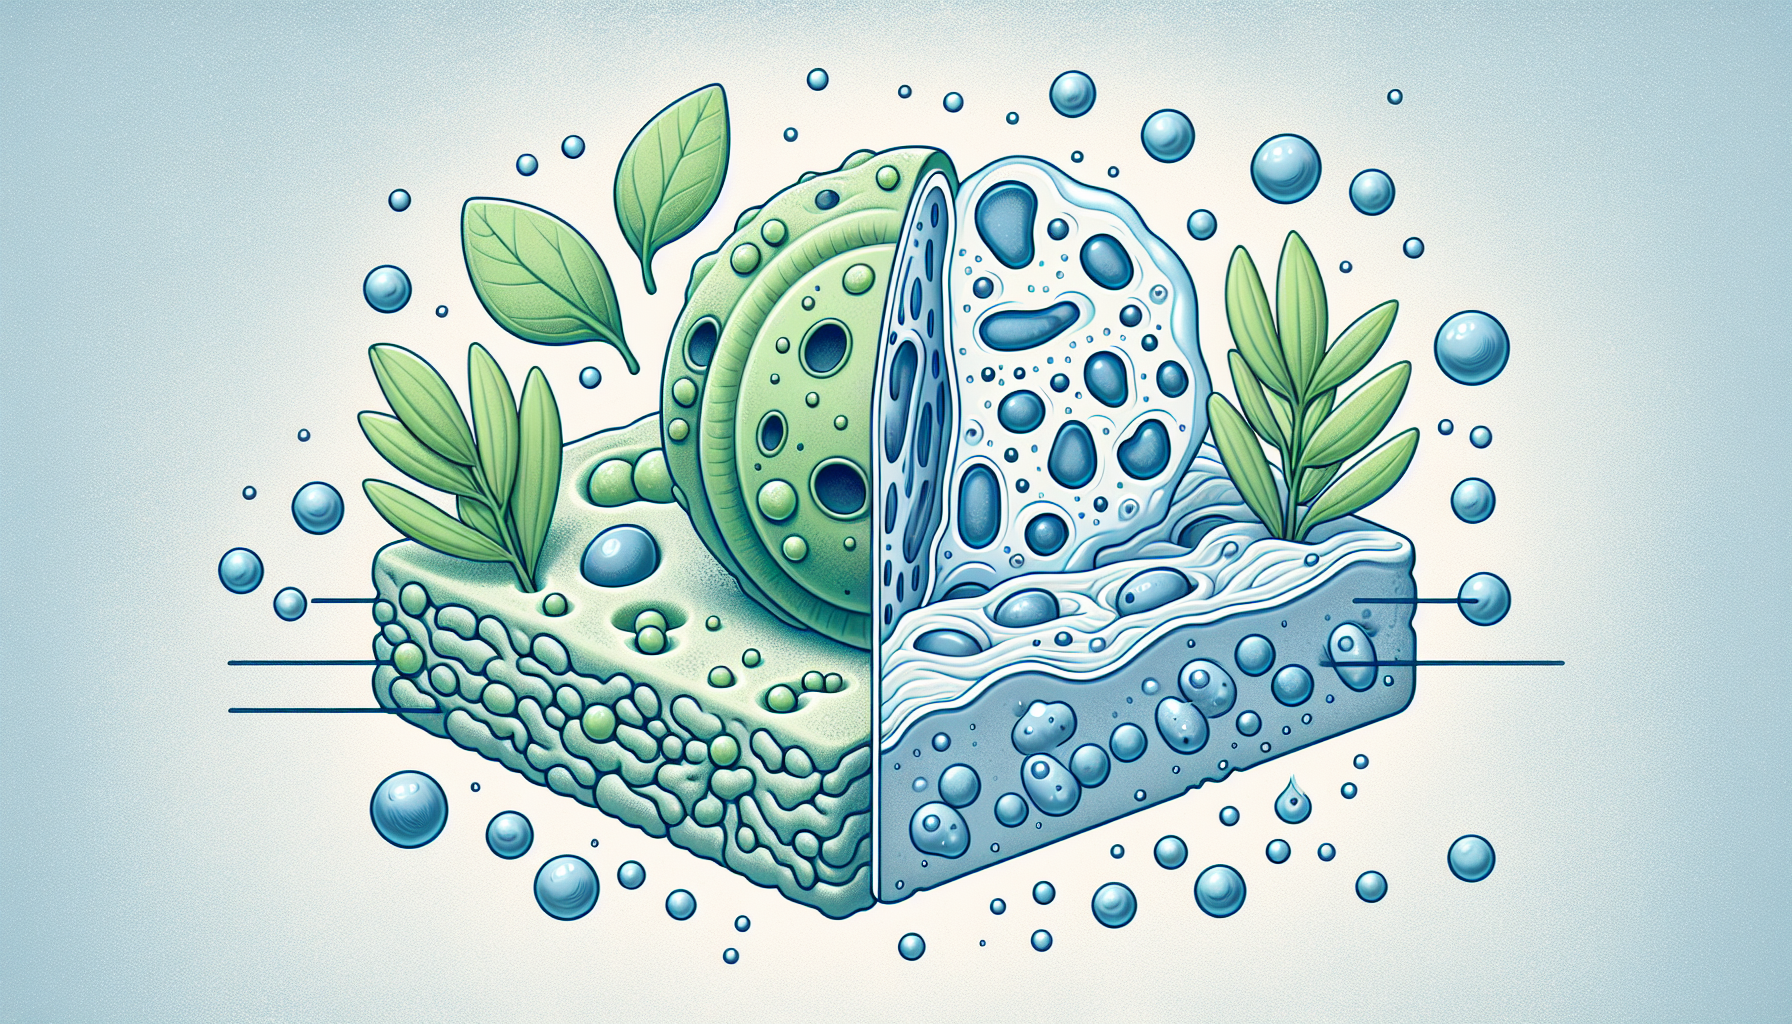 Illustration of osmosis in plant and animal cells